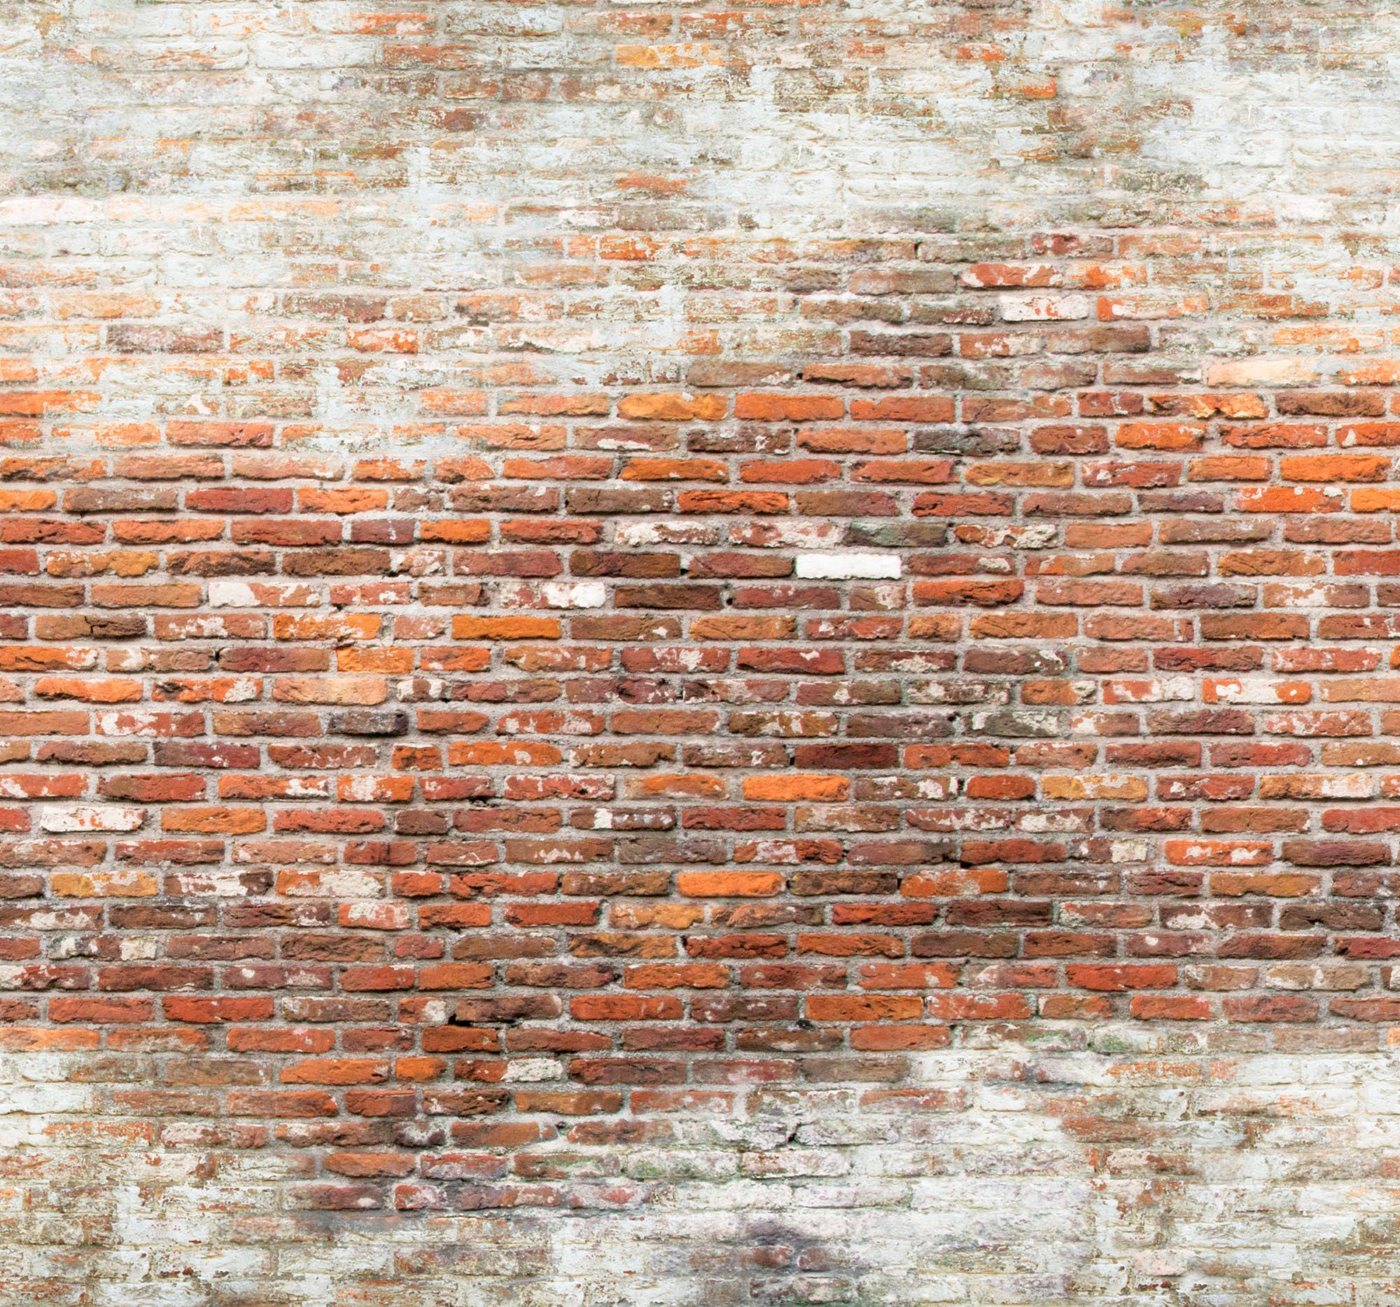 Art for the home Fototapete Brick wall 2, 300 cm Länge von Art for the home